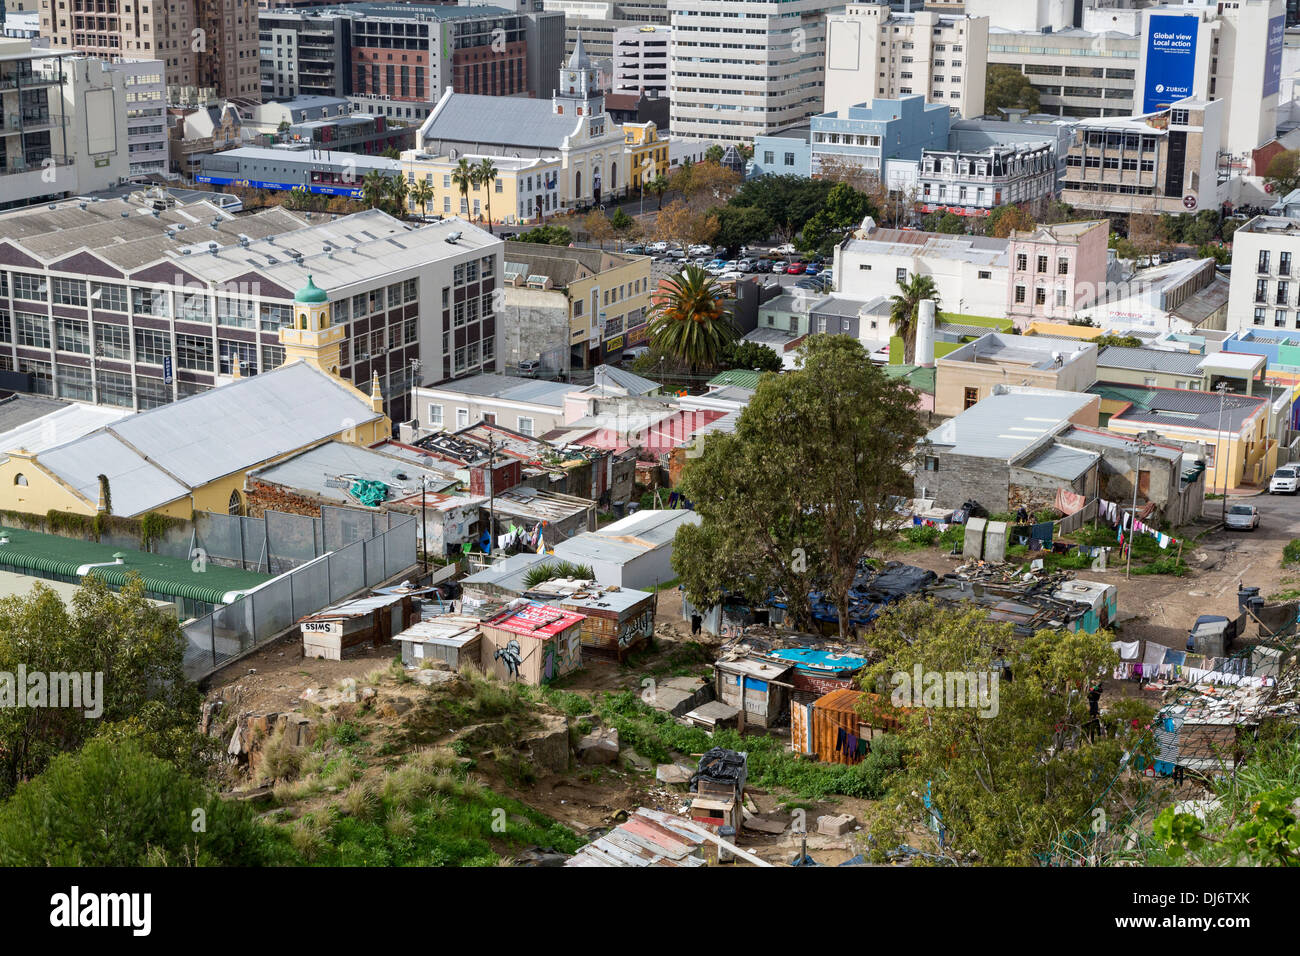 South Africa. Cape Town from Bo-kaap Hill. Shantytown housing at base of hill, in foreground. Stock Photo